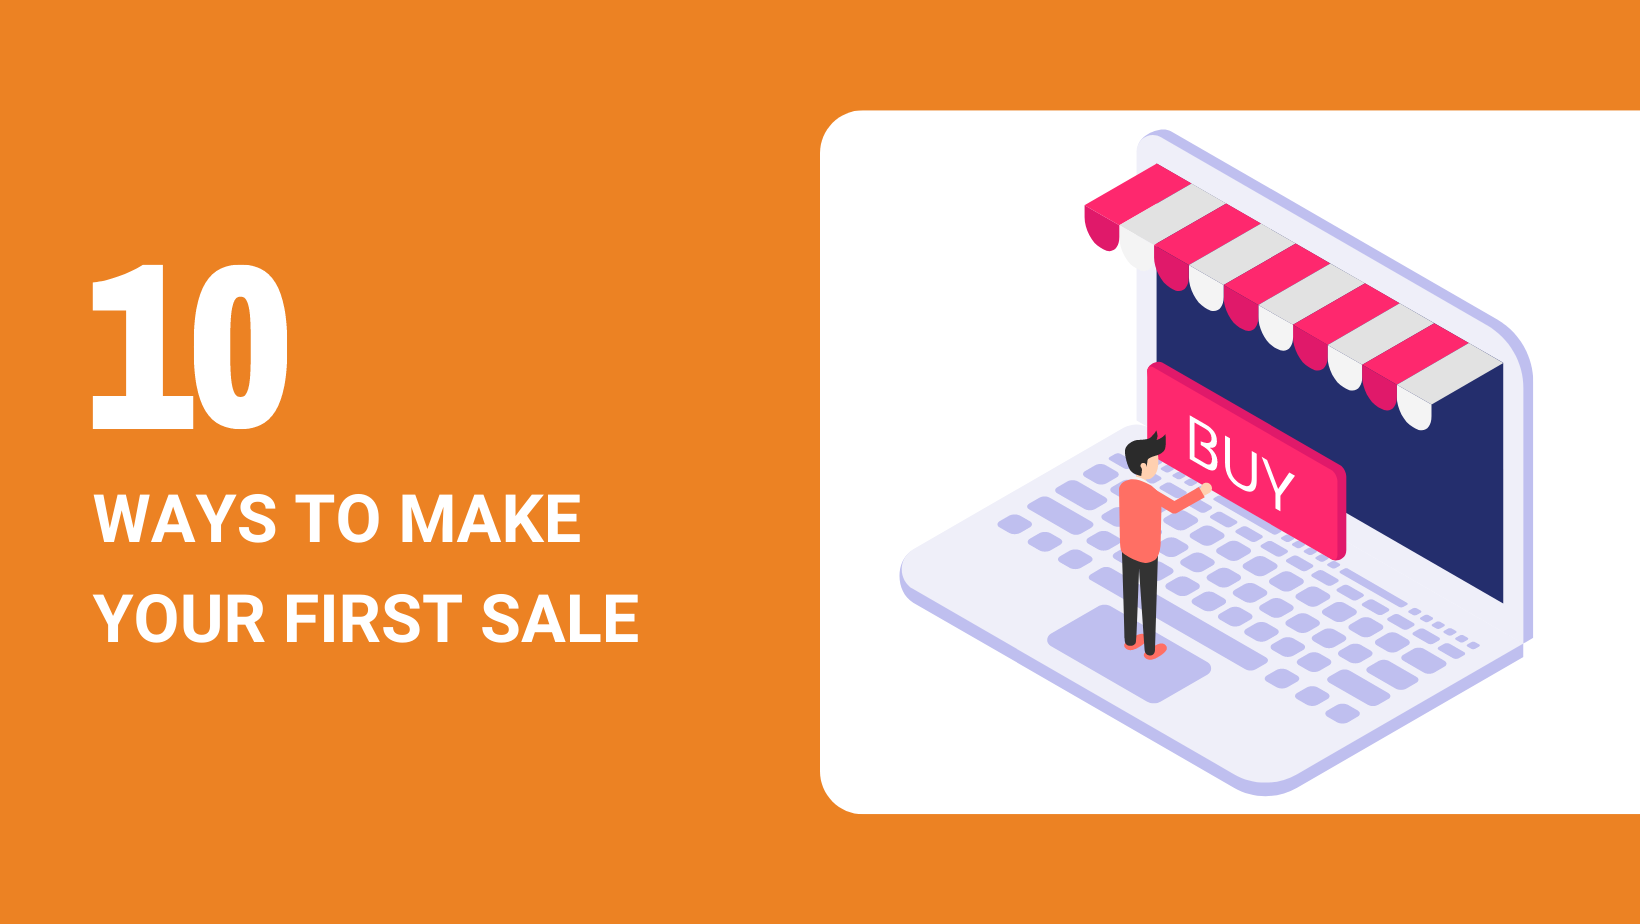 10 WAYS ON HOW TO GET YOUR FIRST SALE